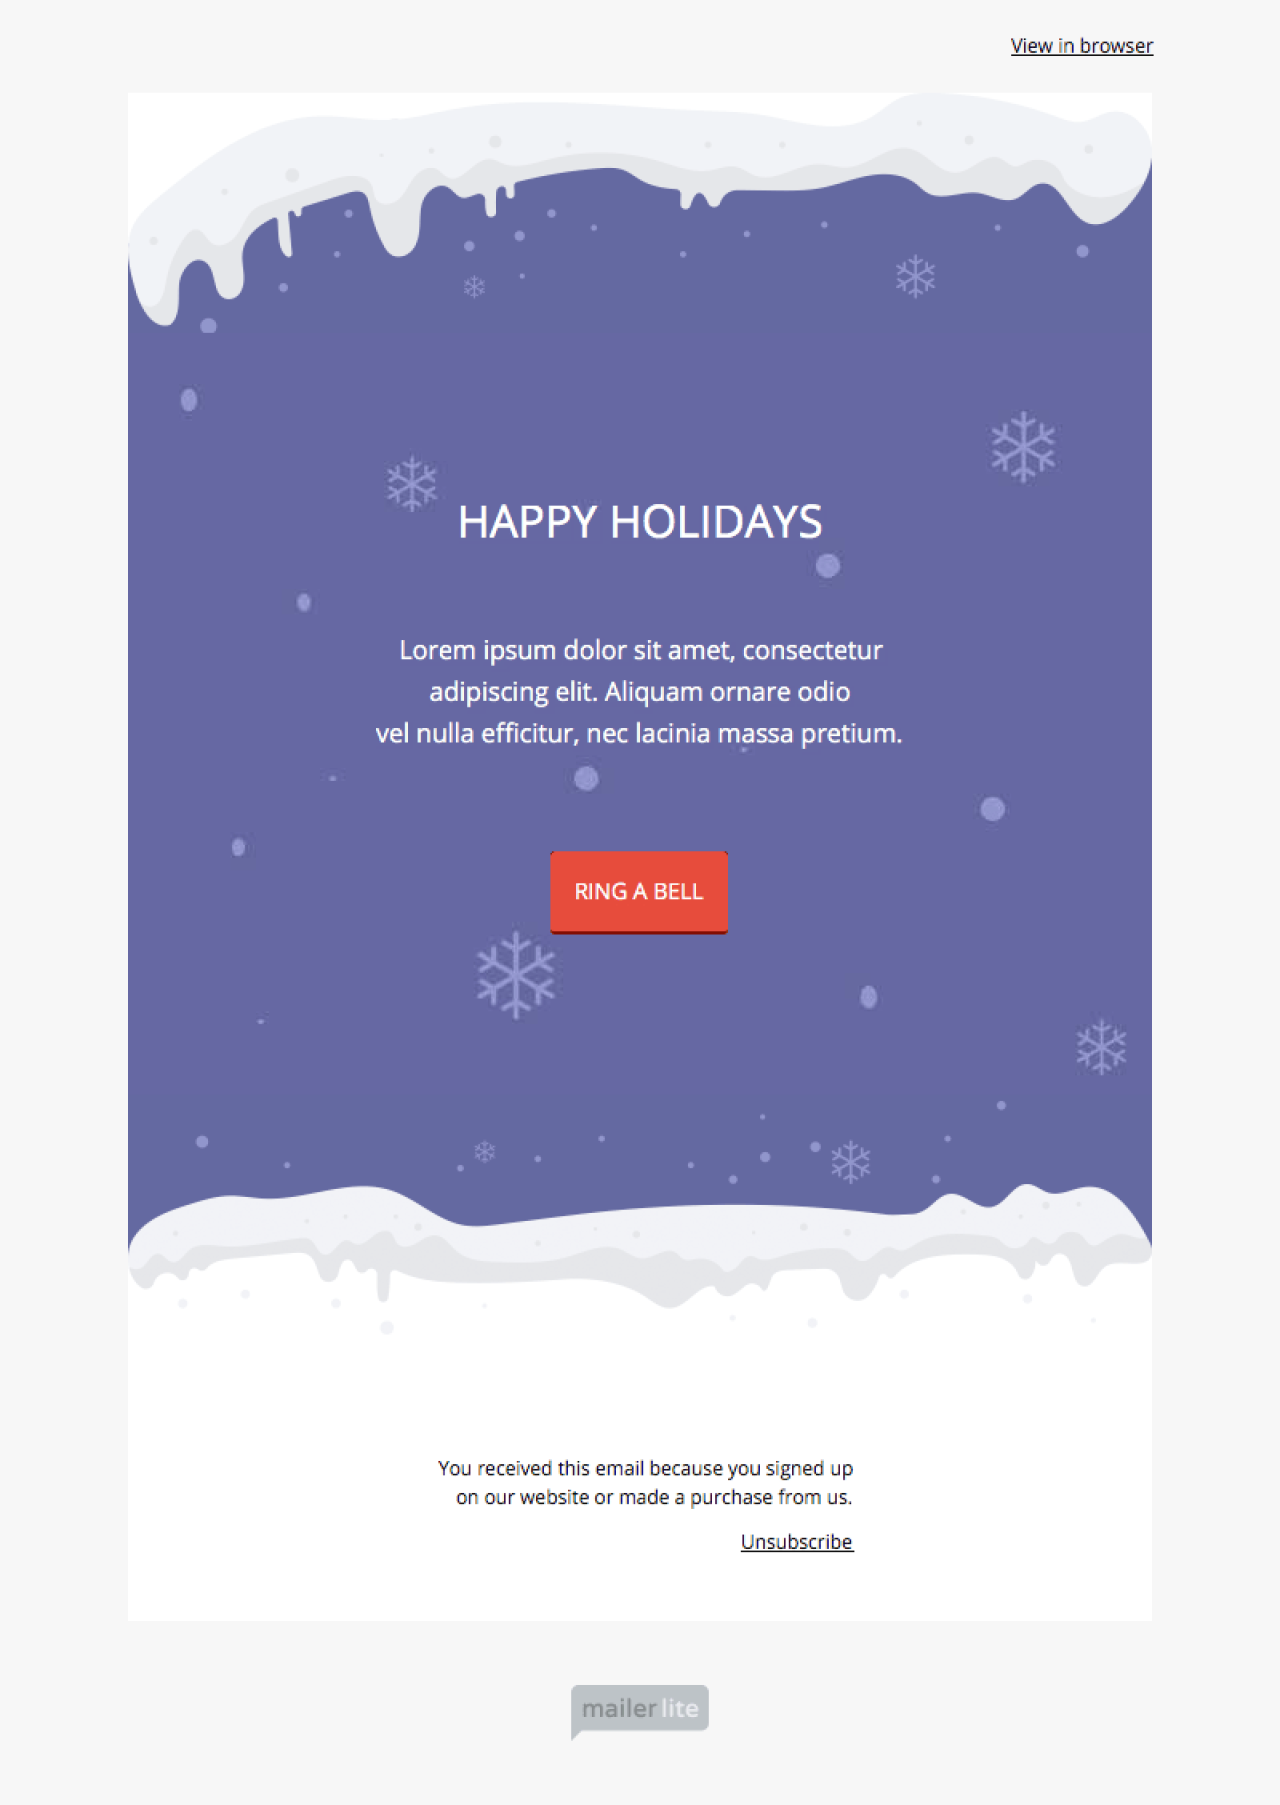 Snowy Christmas Greetings example - Made with MailerLite